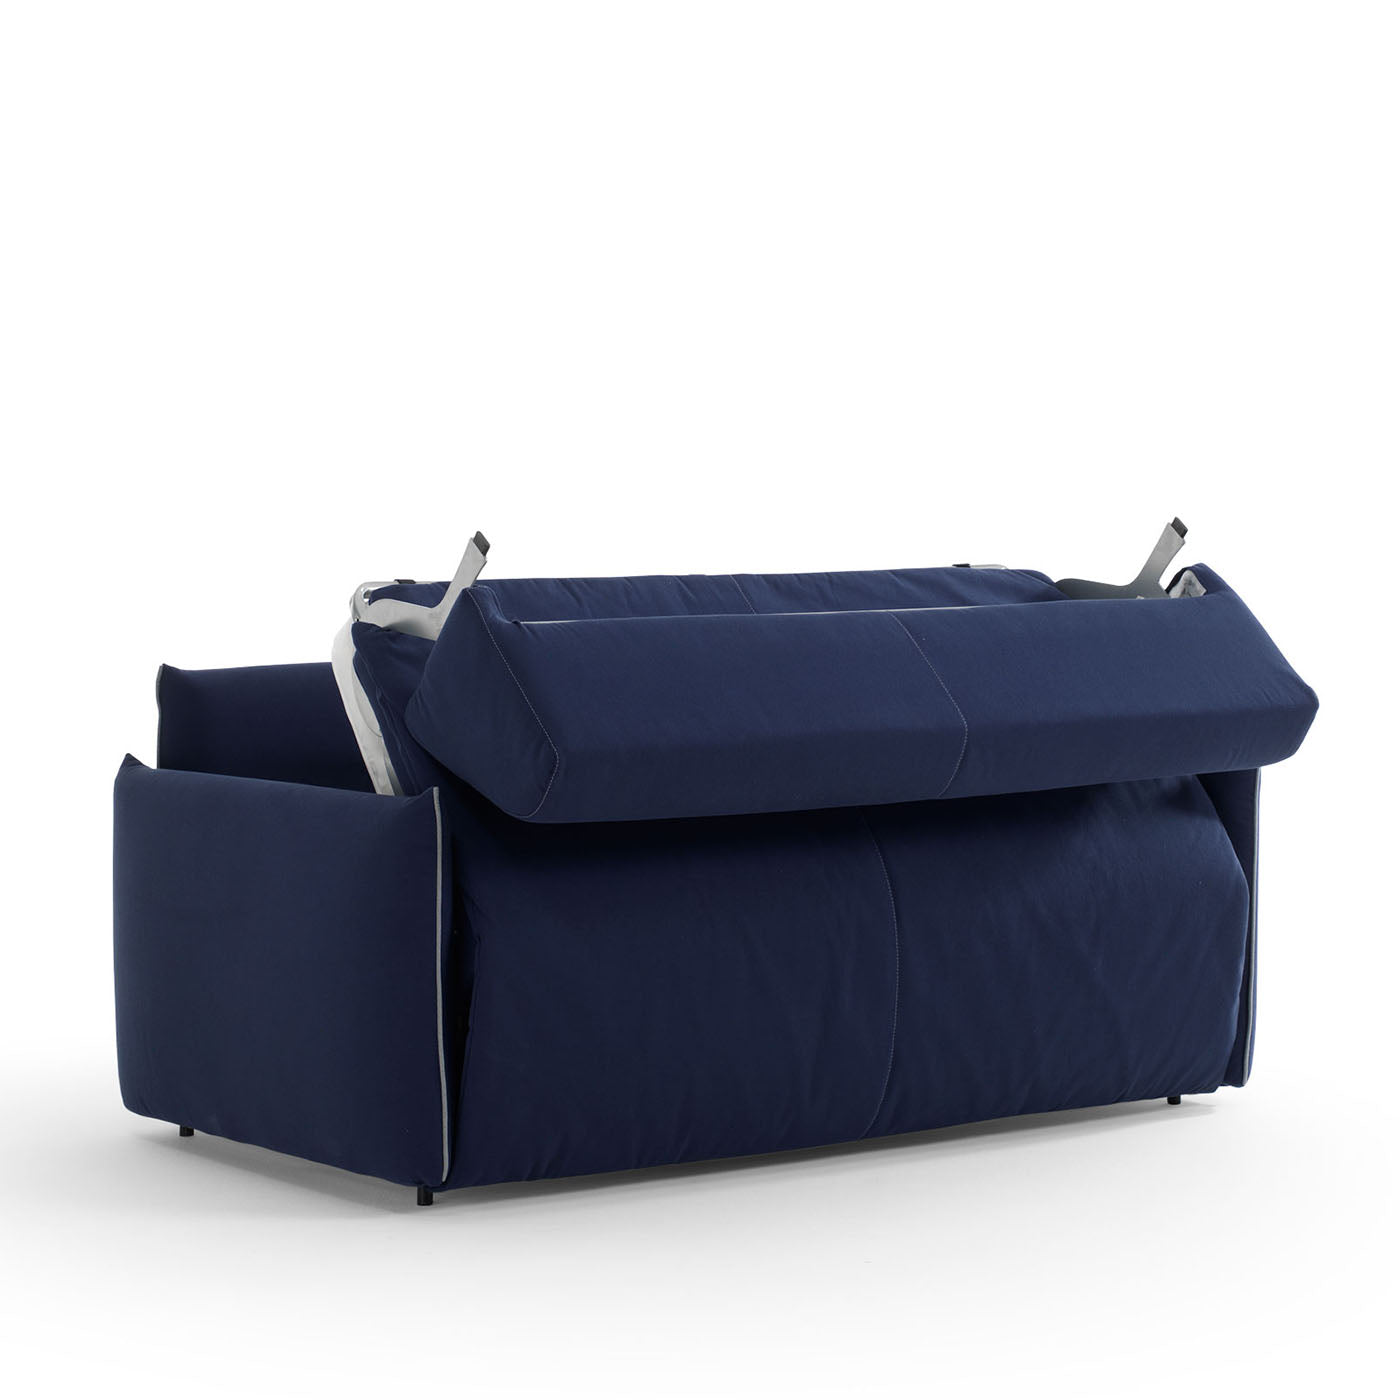 Facto Blue Sofabed - Alternative view 1